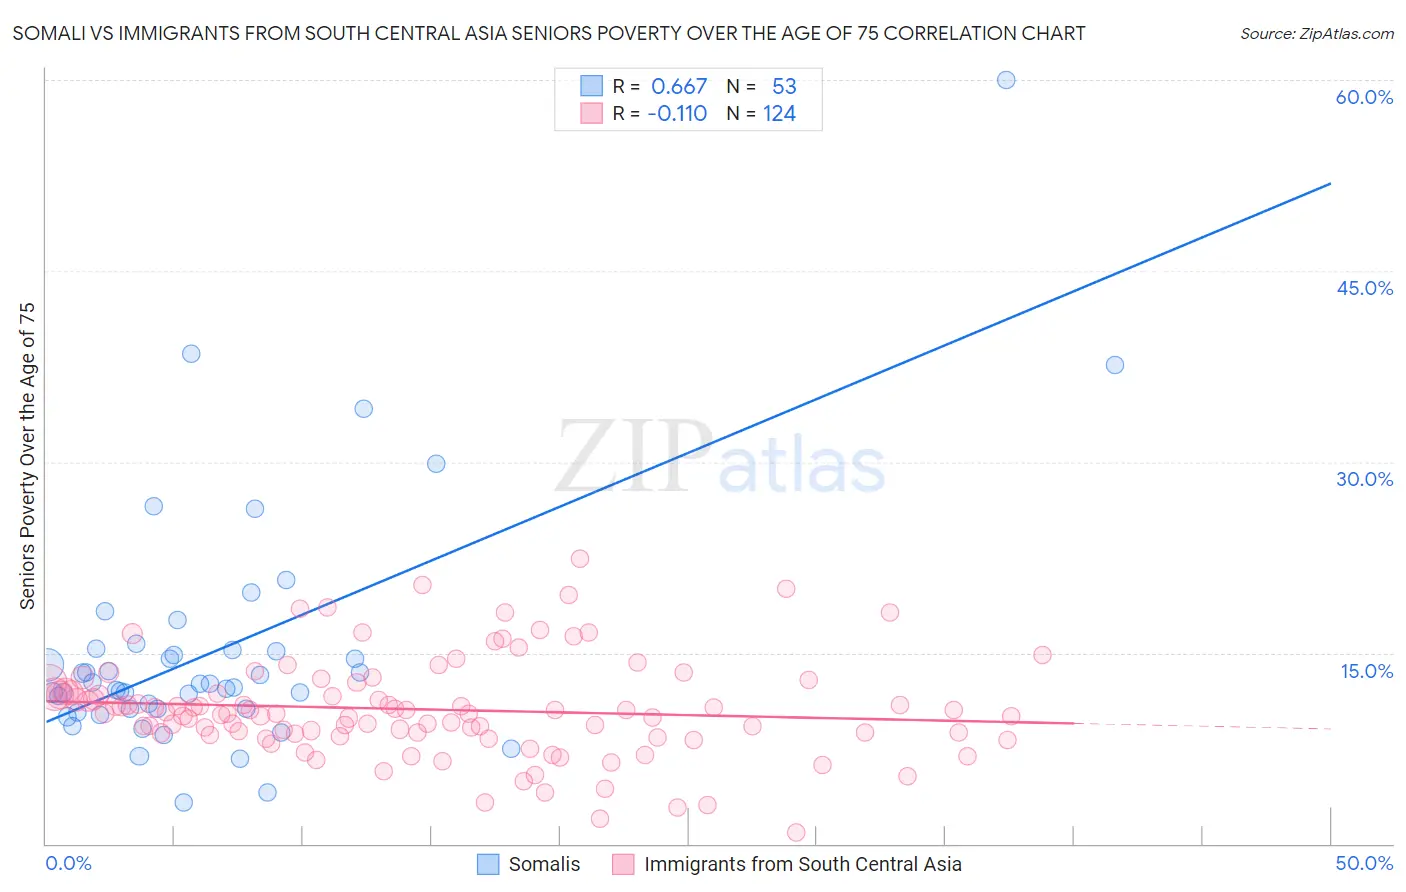 Somali vs Immigrants from South Central Asia Seniors Poverty Over the Age of 75